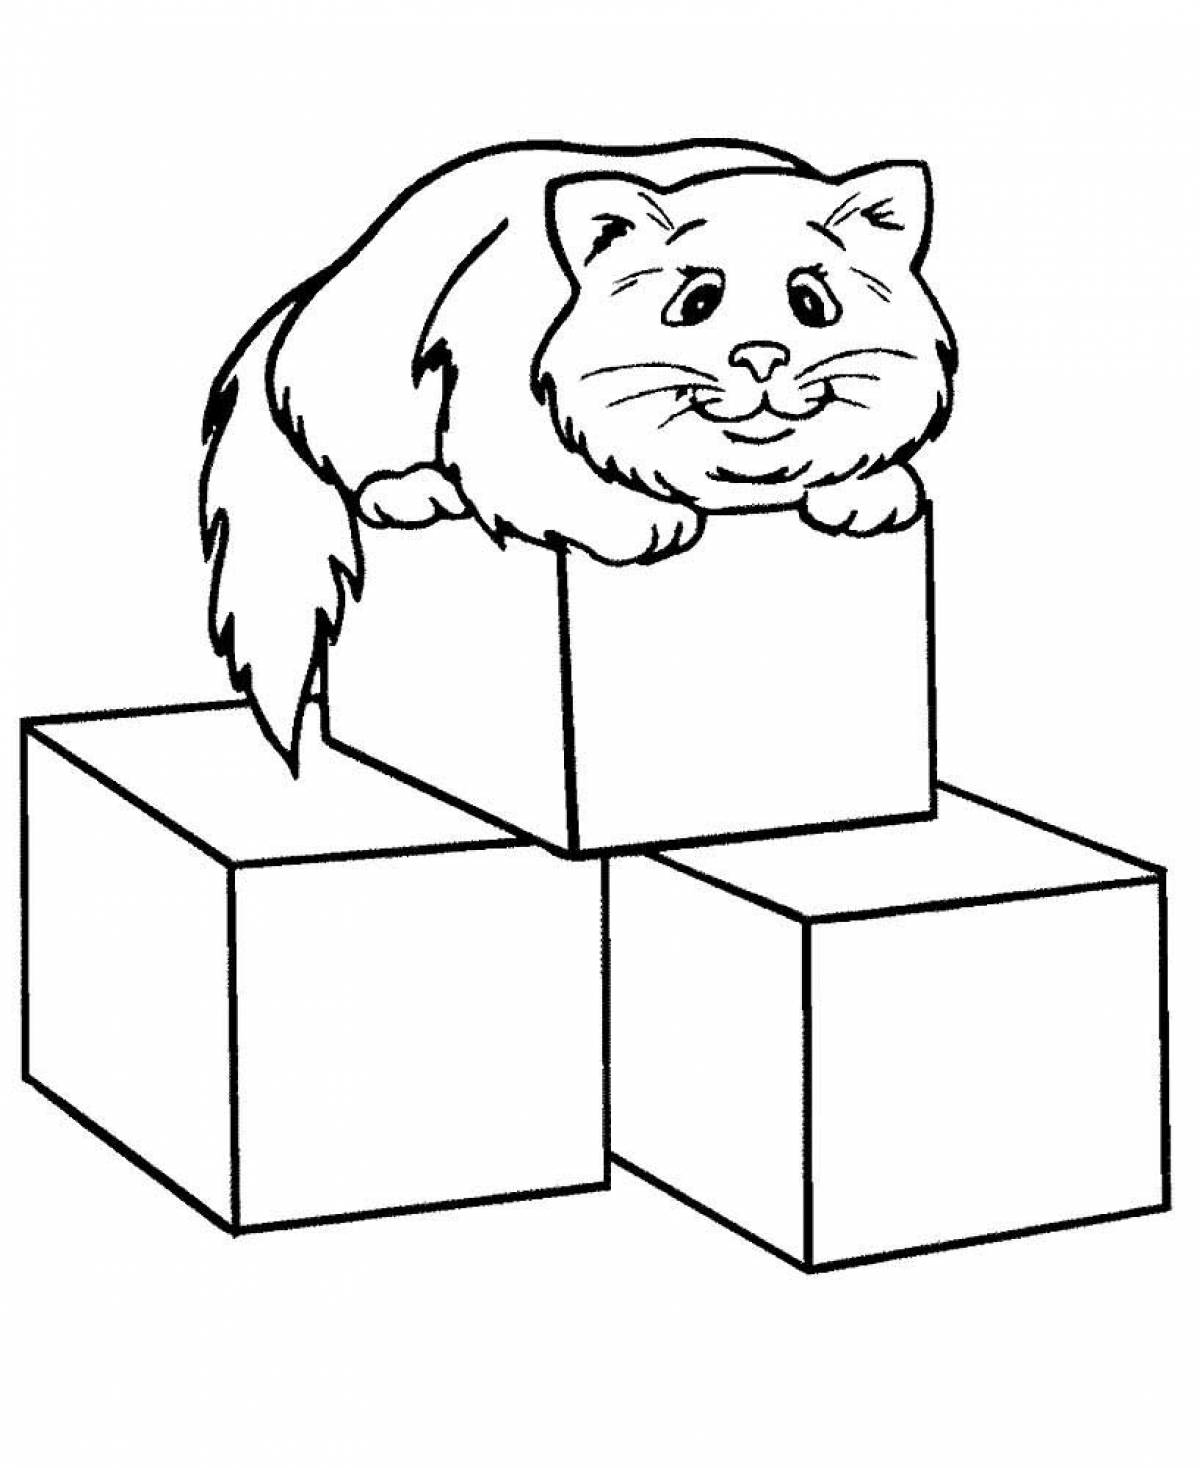 Cube and cat